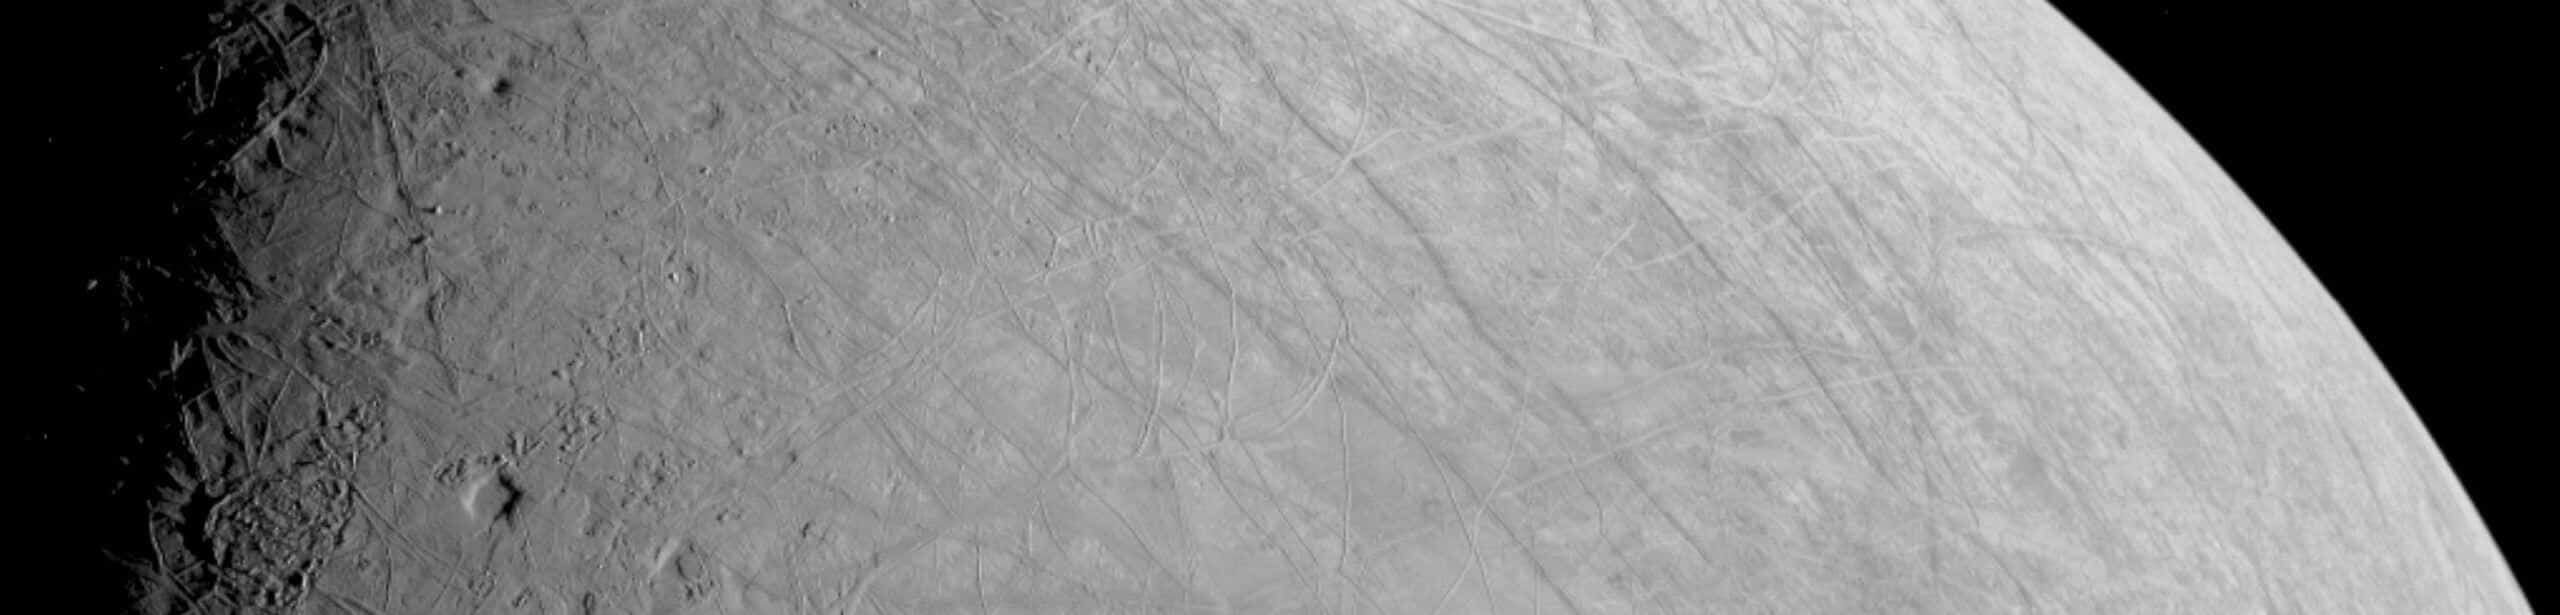 The icy surface of Europa, Jupiter's moon, was imaged by the Juno spacecraft during the spacecraft's flyby on September 29, 2022. At closest approach, the spacecraft was about 352 km away. Credit: NASA/JPL- Caltech/SWRI/MSSS